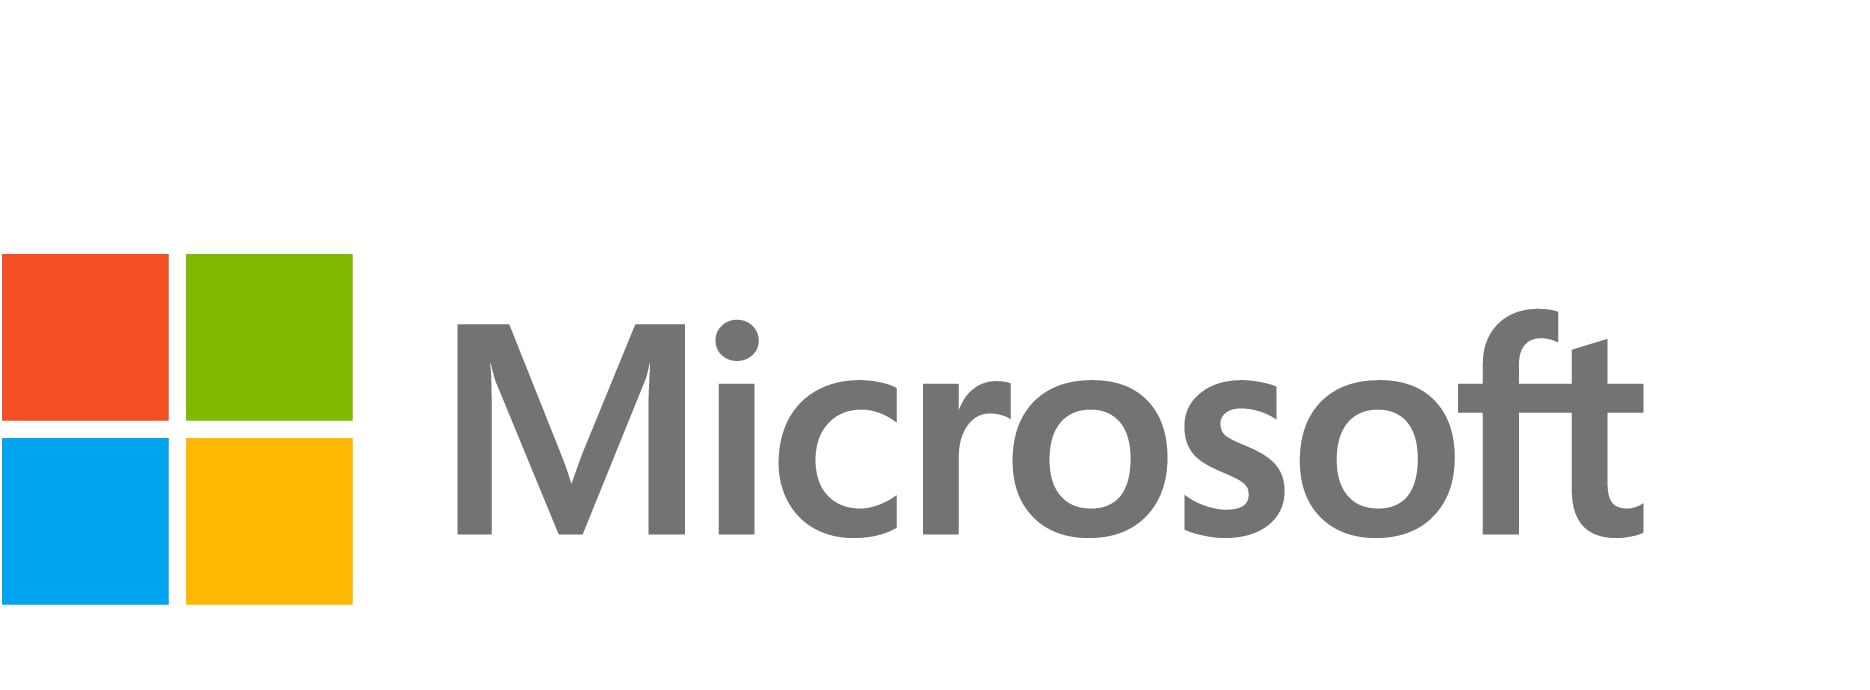 Microsoft Office for Mac - software assurance - 1 device